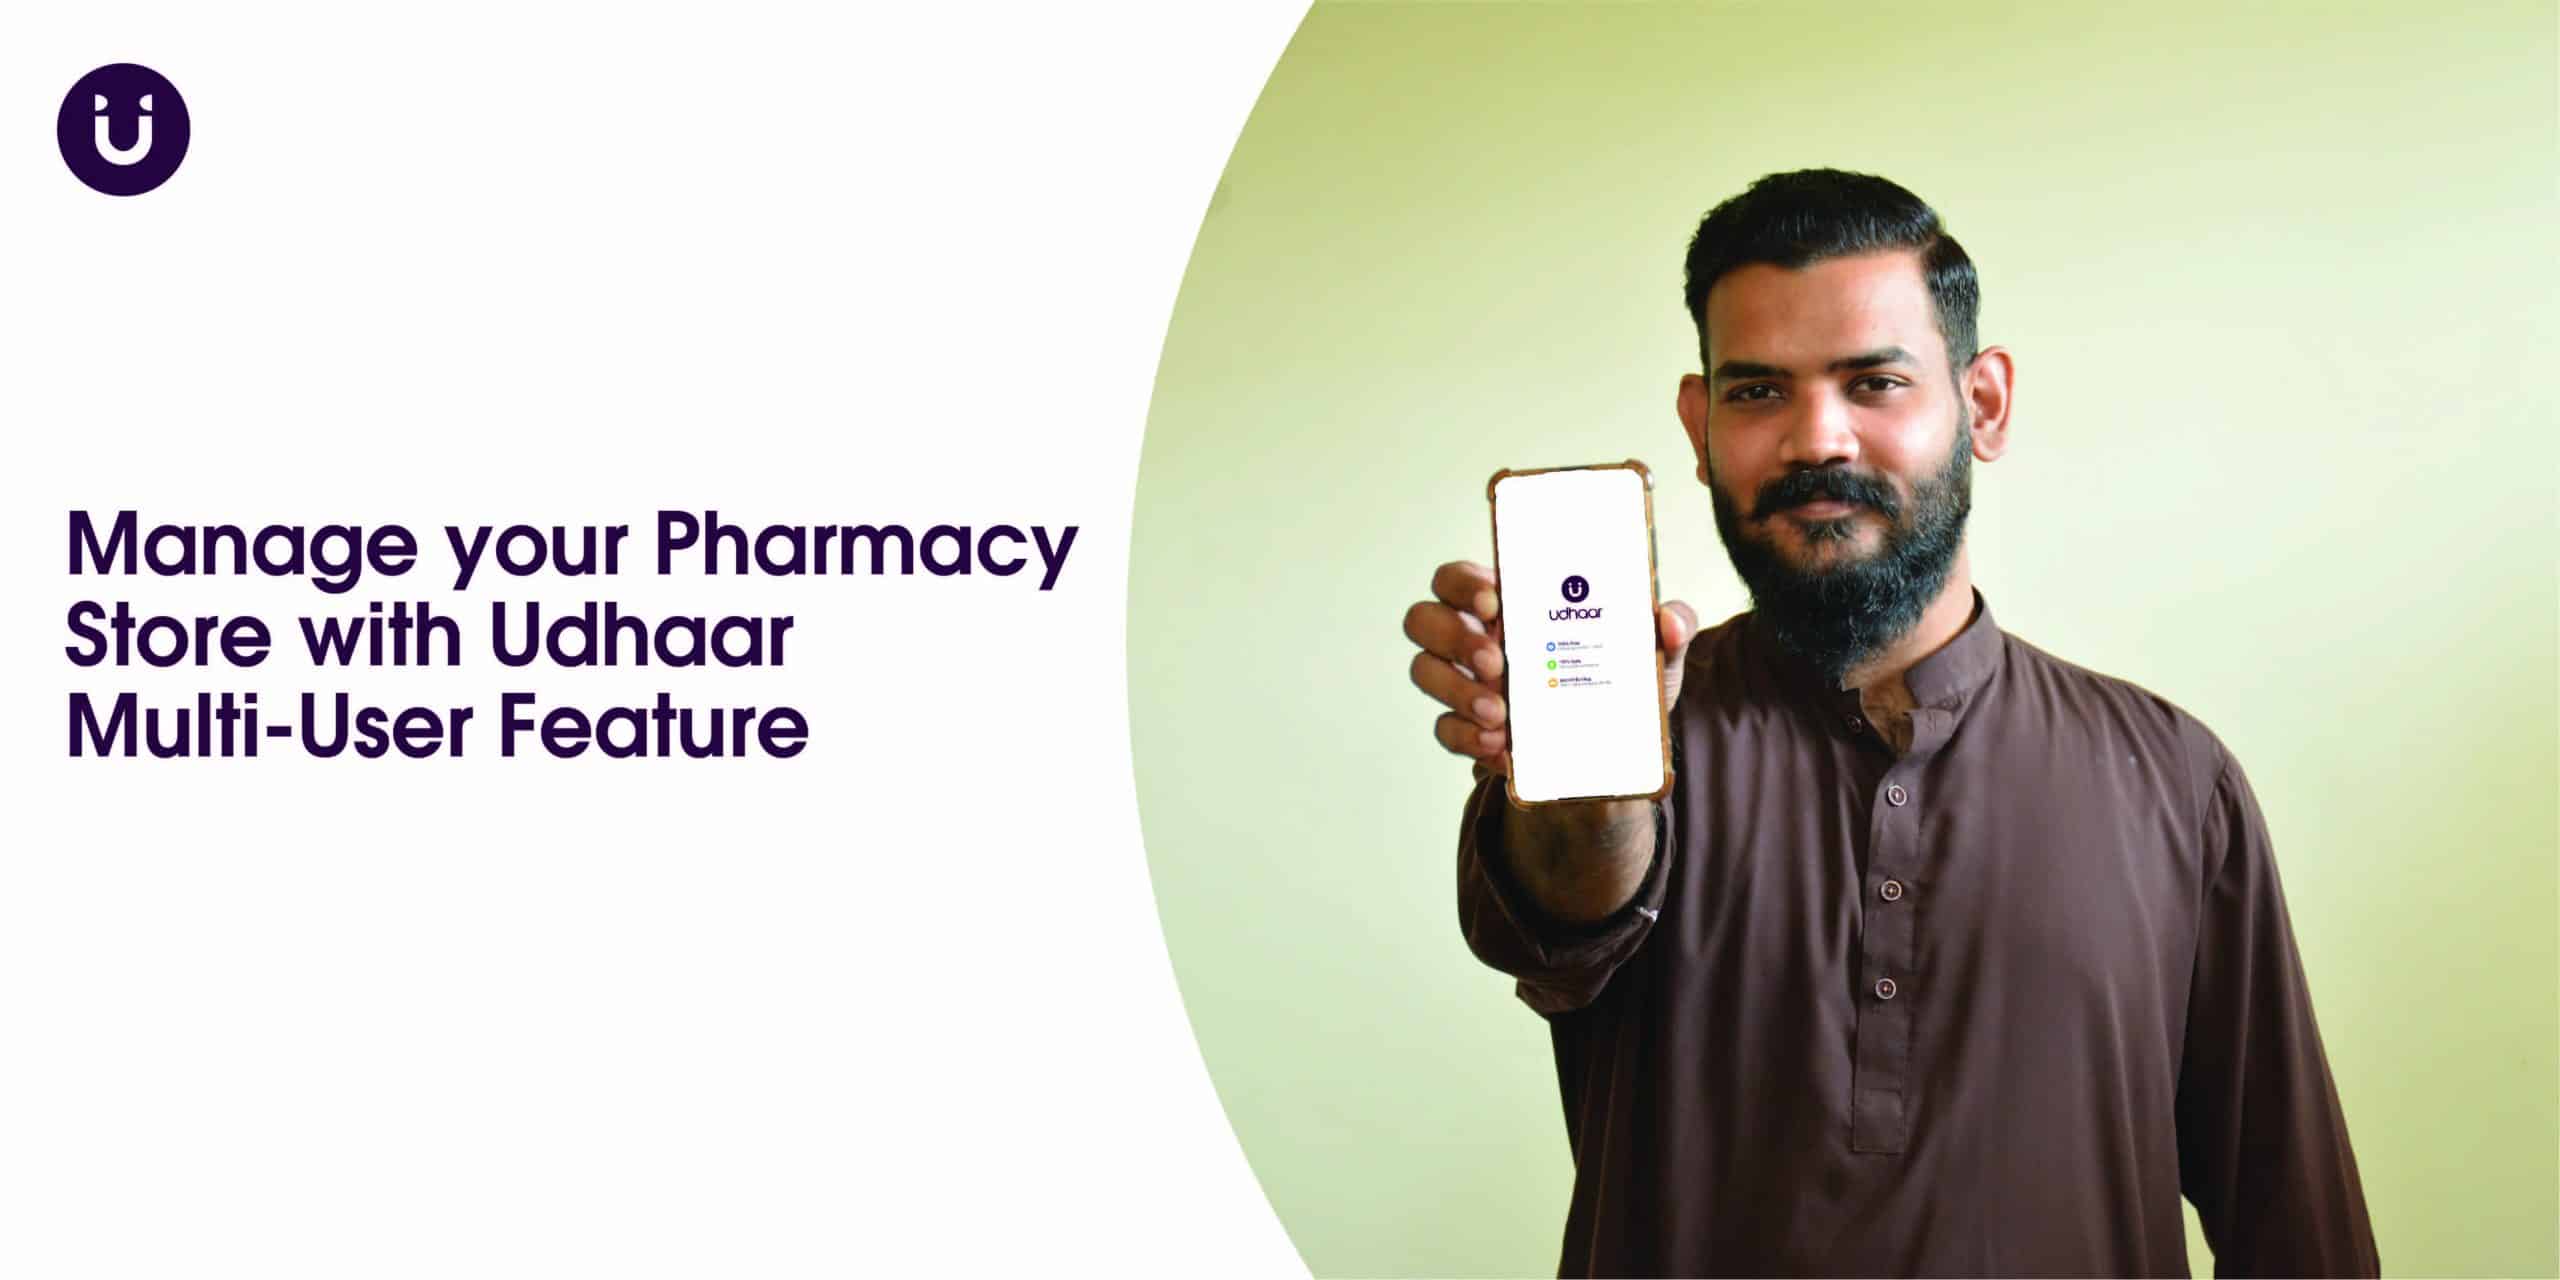 Manage your Pharmacy Store with Udhaar Multi-User Feature